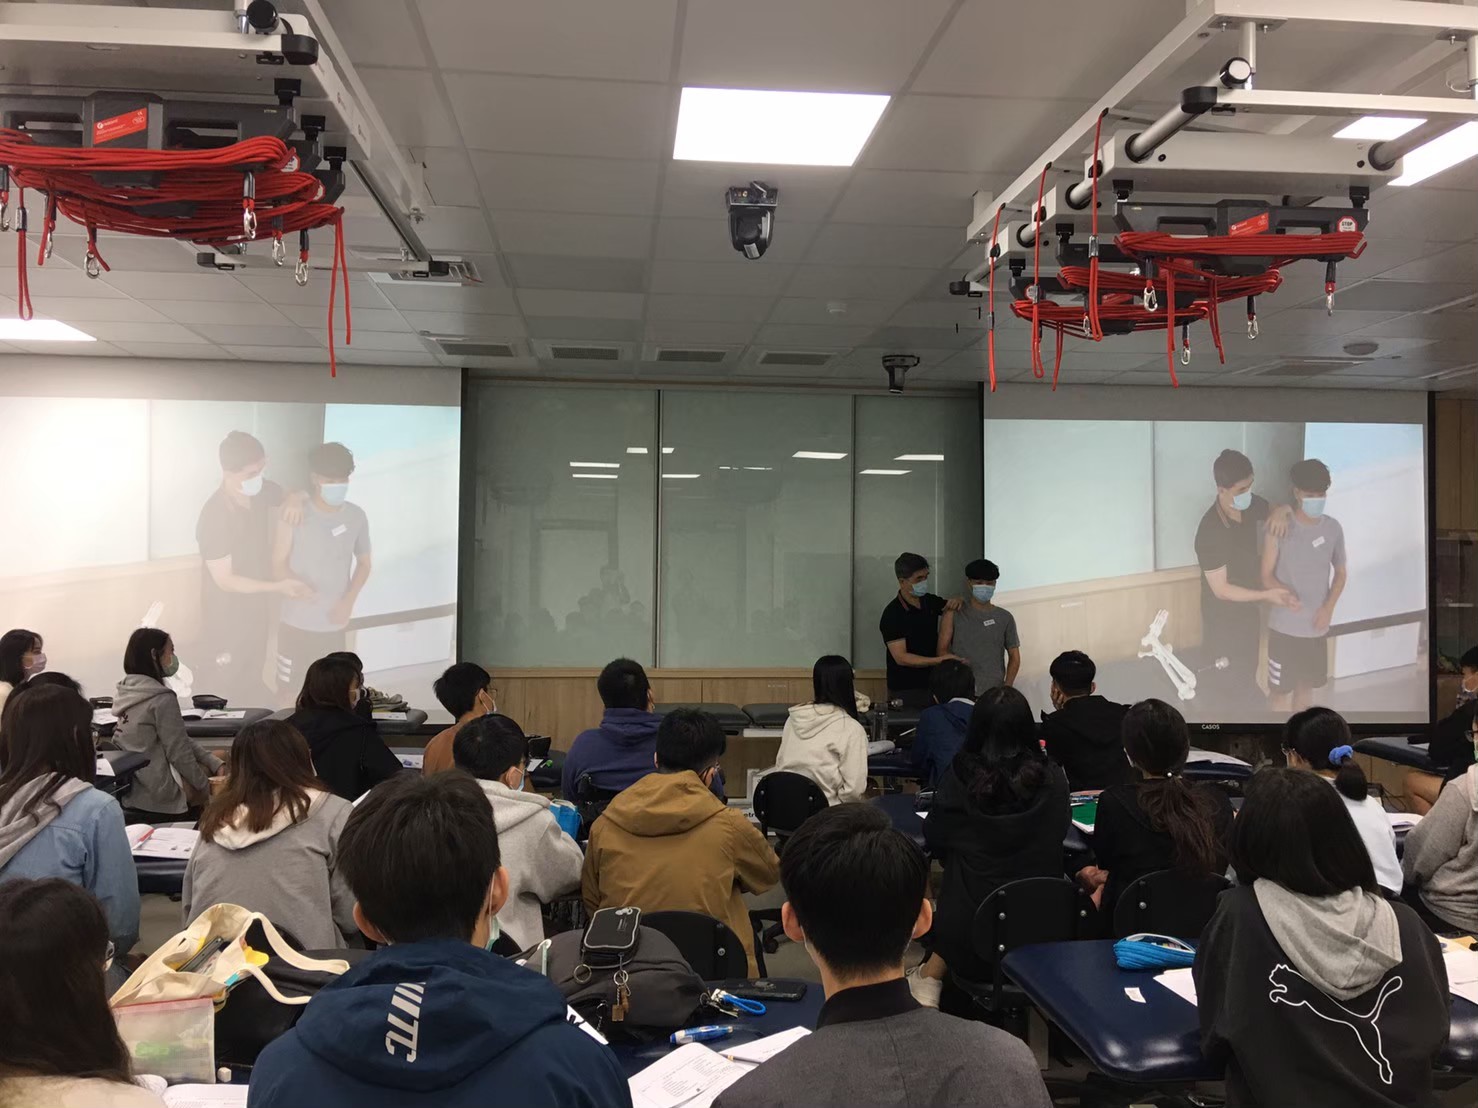 Mentors guiding students in practical exercises, enabling them to integrate theory and practice, applying their skills in the national licensing examination